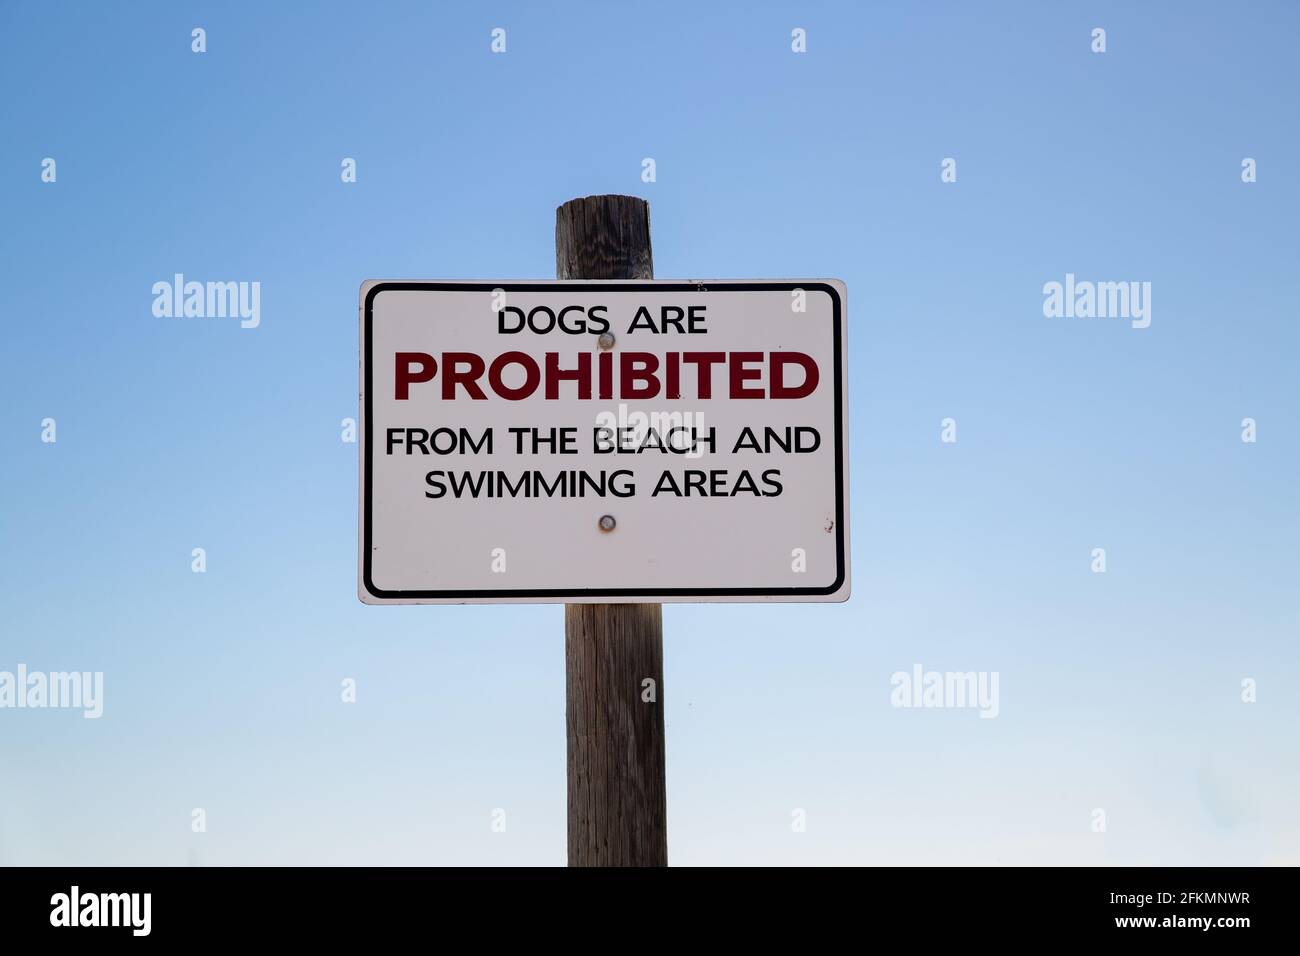 Dogs prohibited from the beach and swimming areas sign on wooden post with blue sky background Stock Photo